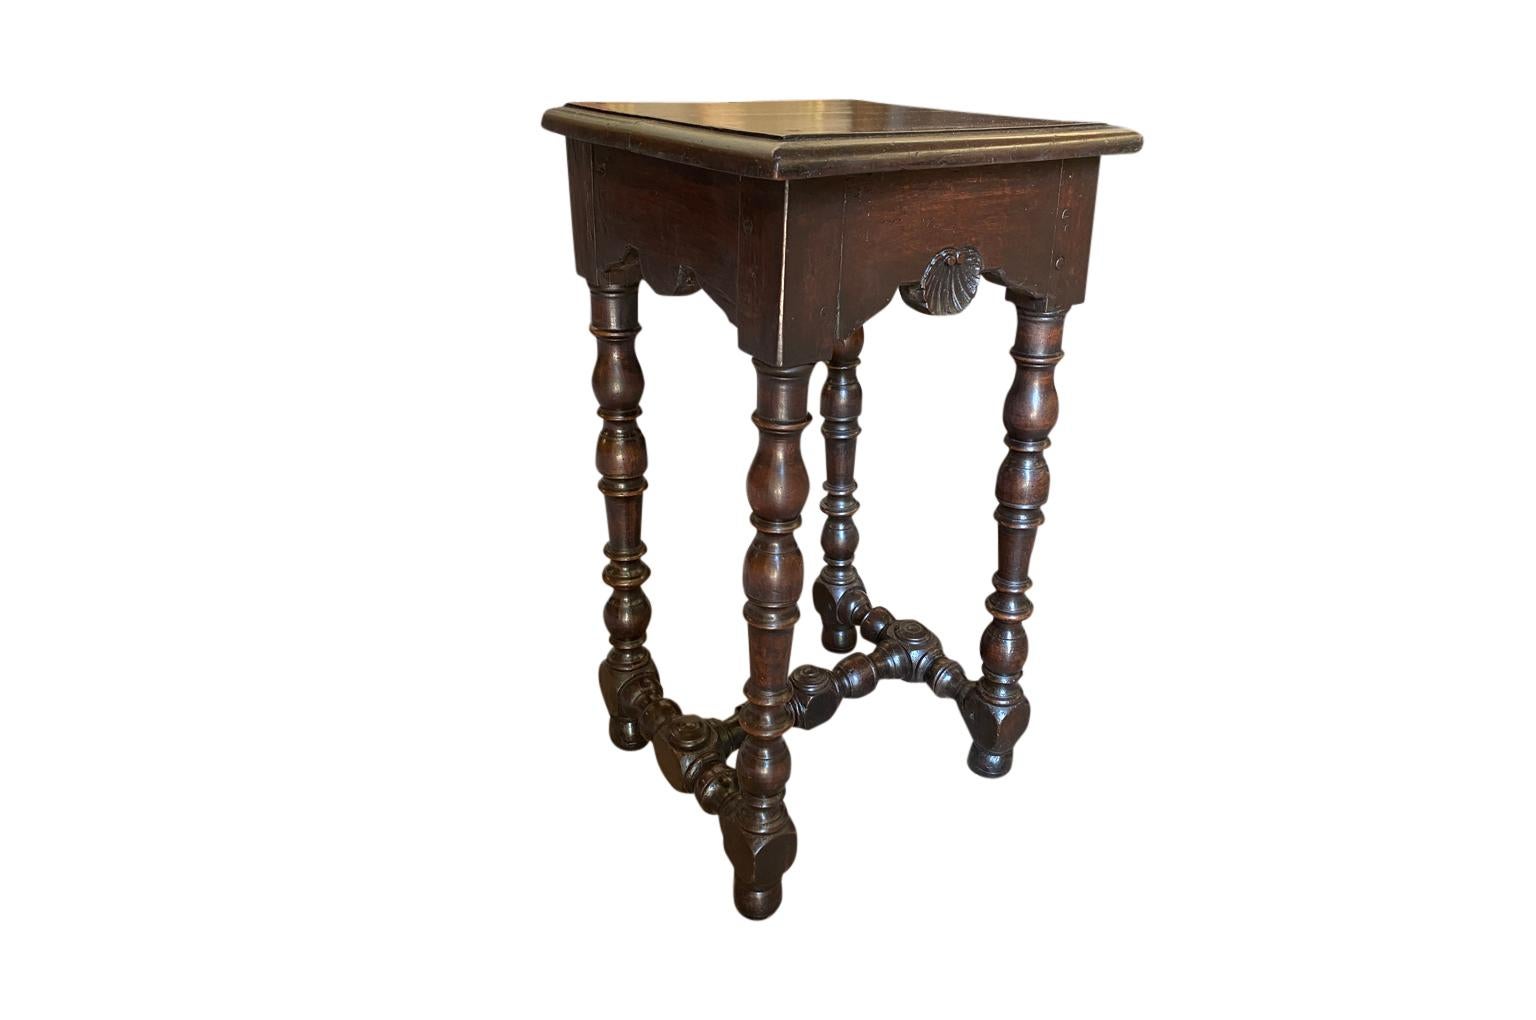 A very handsome mid-19th century Louis XIII style Selette - Side table from Northern Italy in beautiful walnut. Beautiful carved shell motif and nicely turned legs. Great patina - warm and luminous.